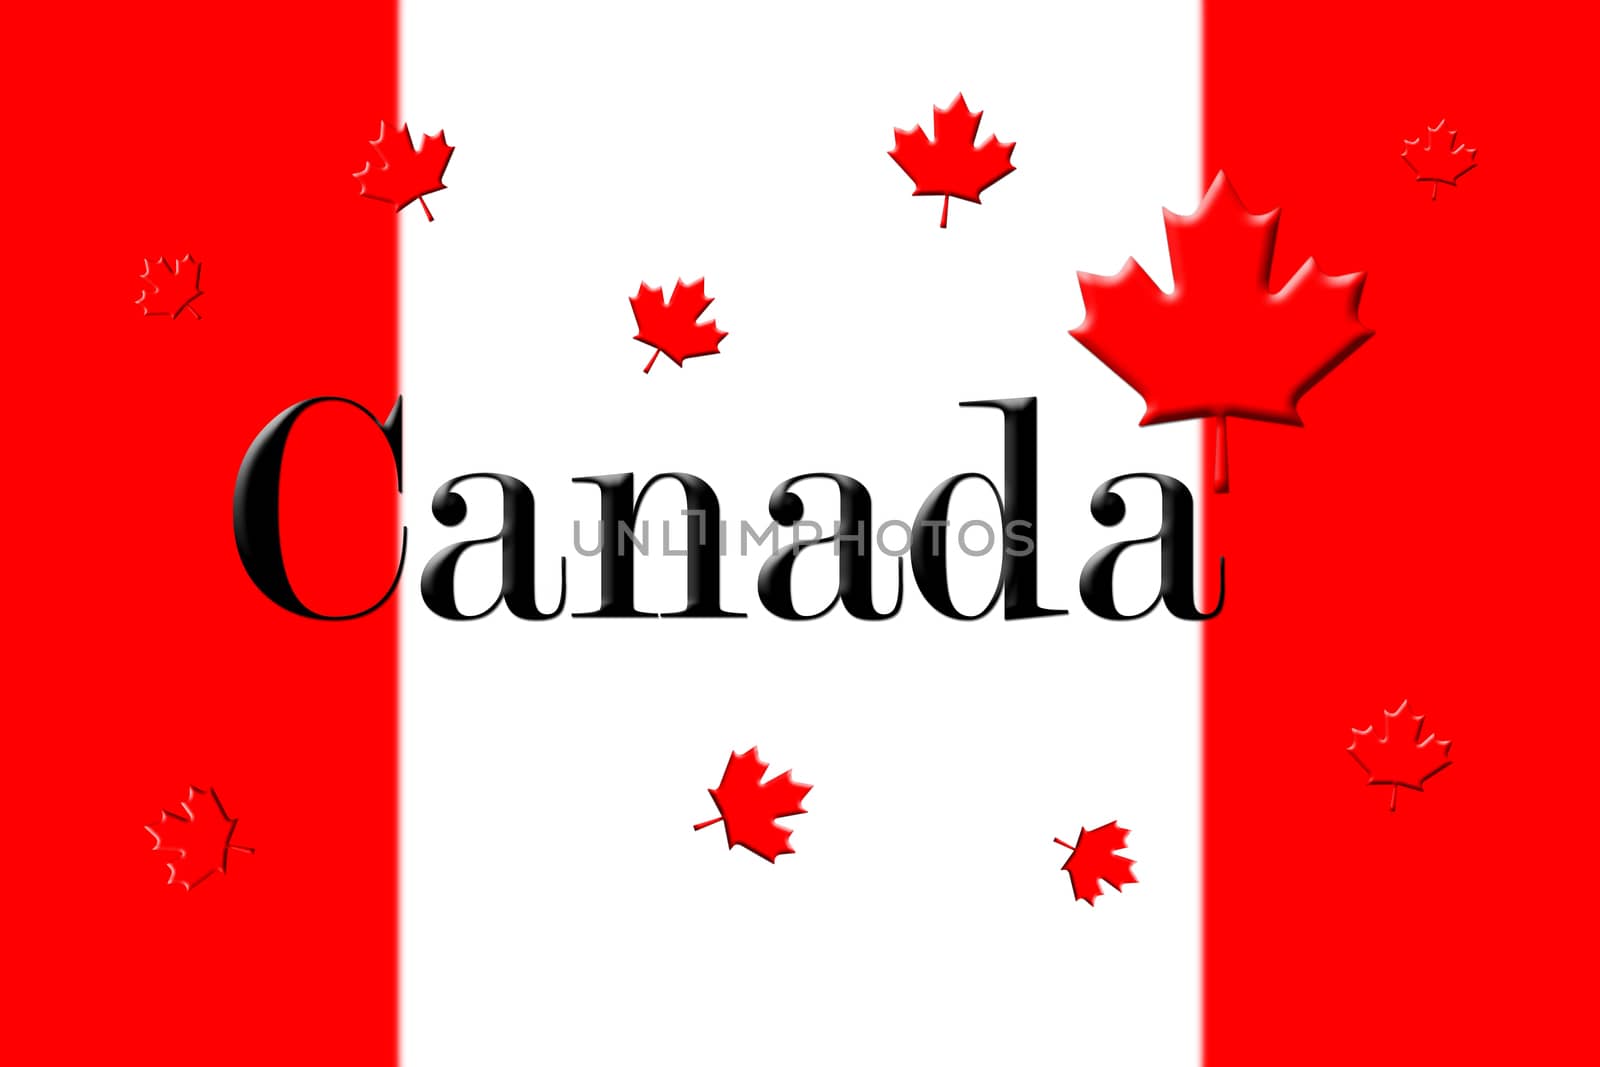 Canadian National Flag With Canada Written On It and Maple Leafs by alexandarilich